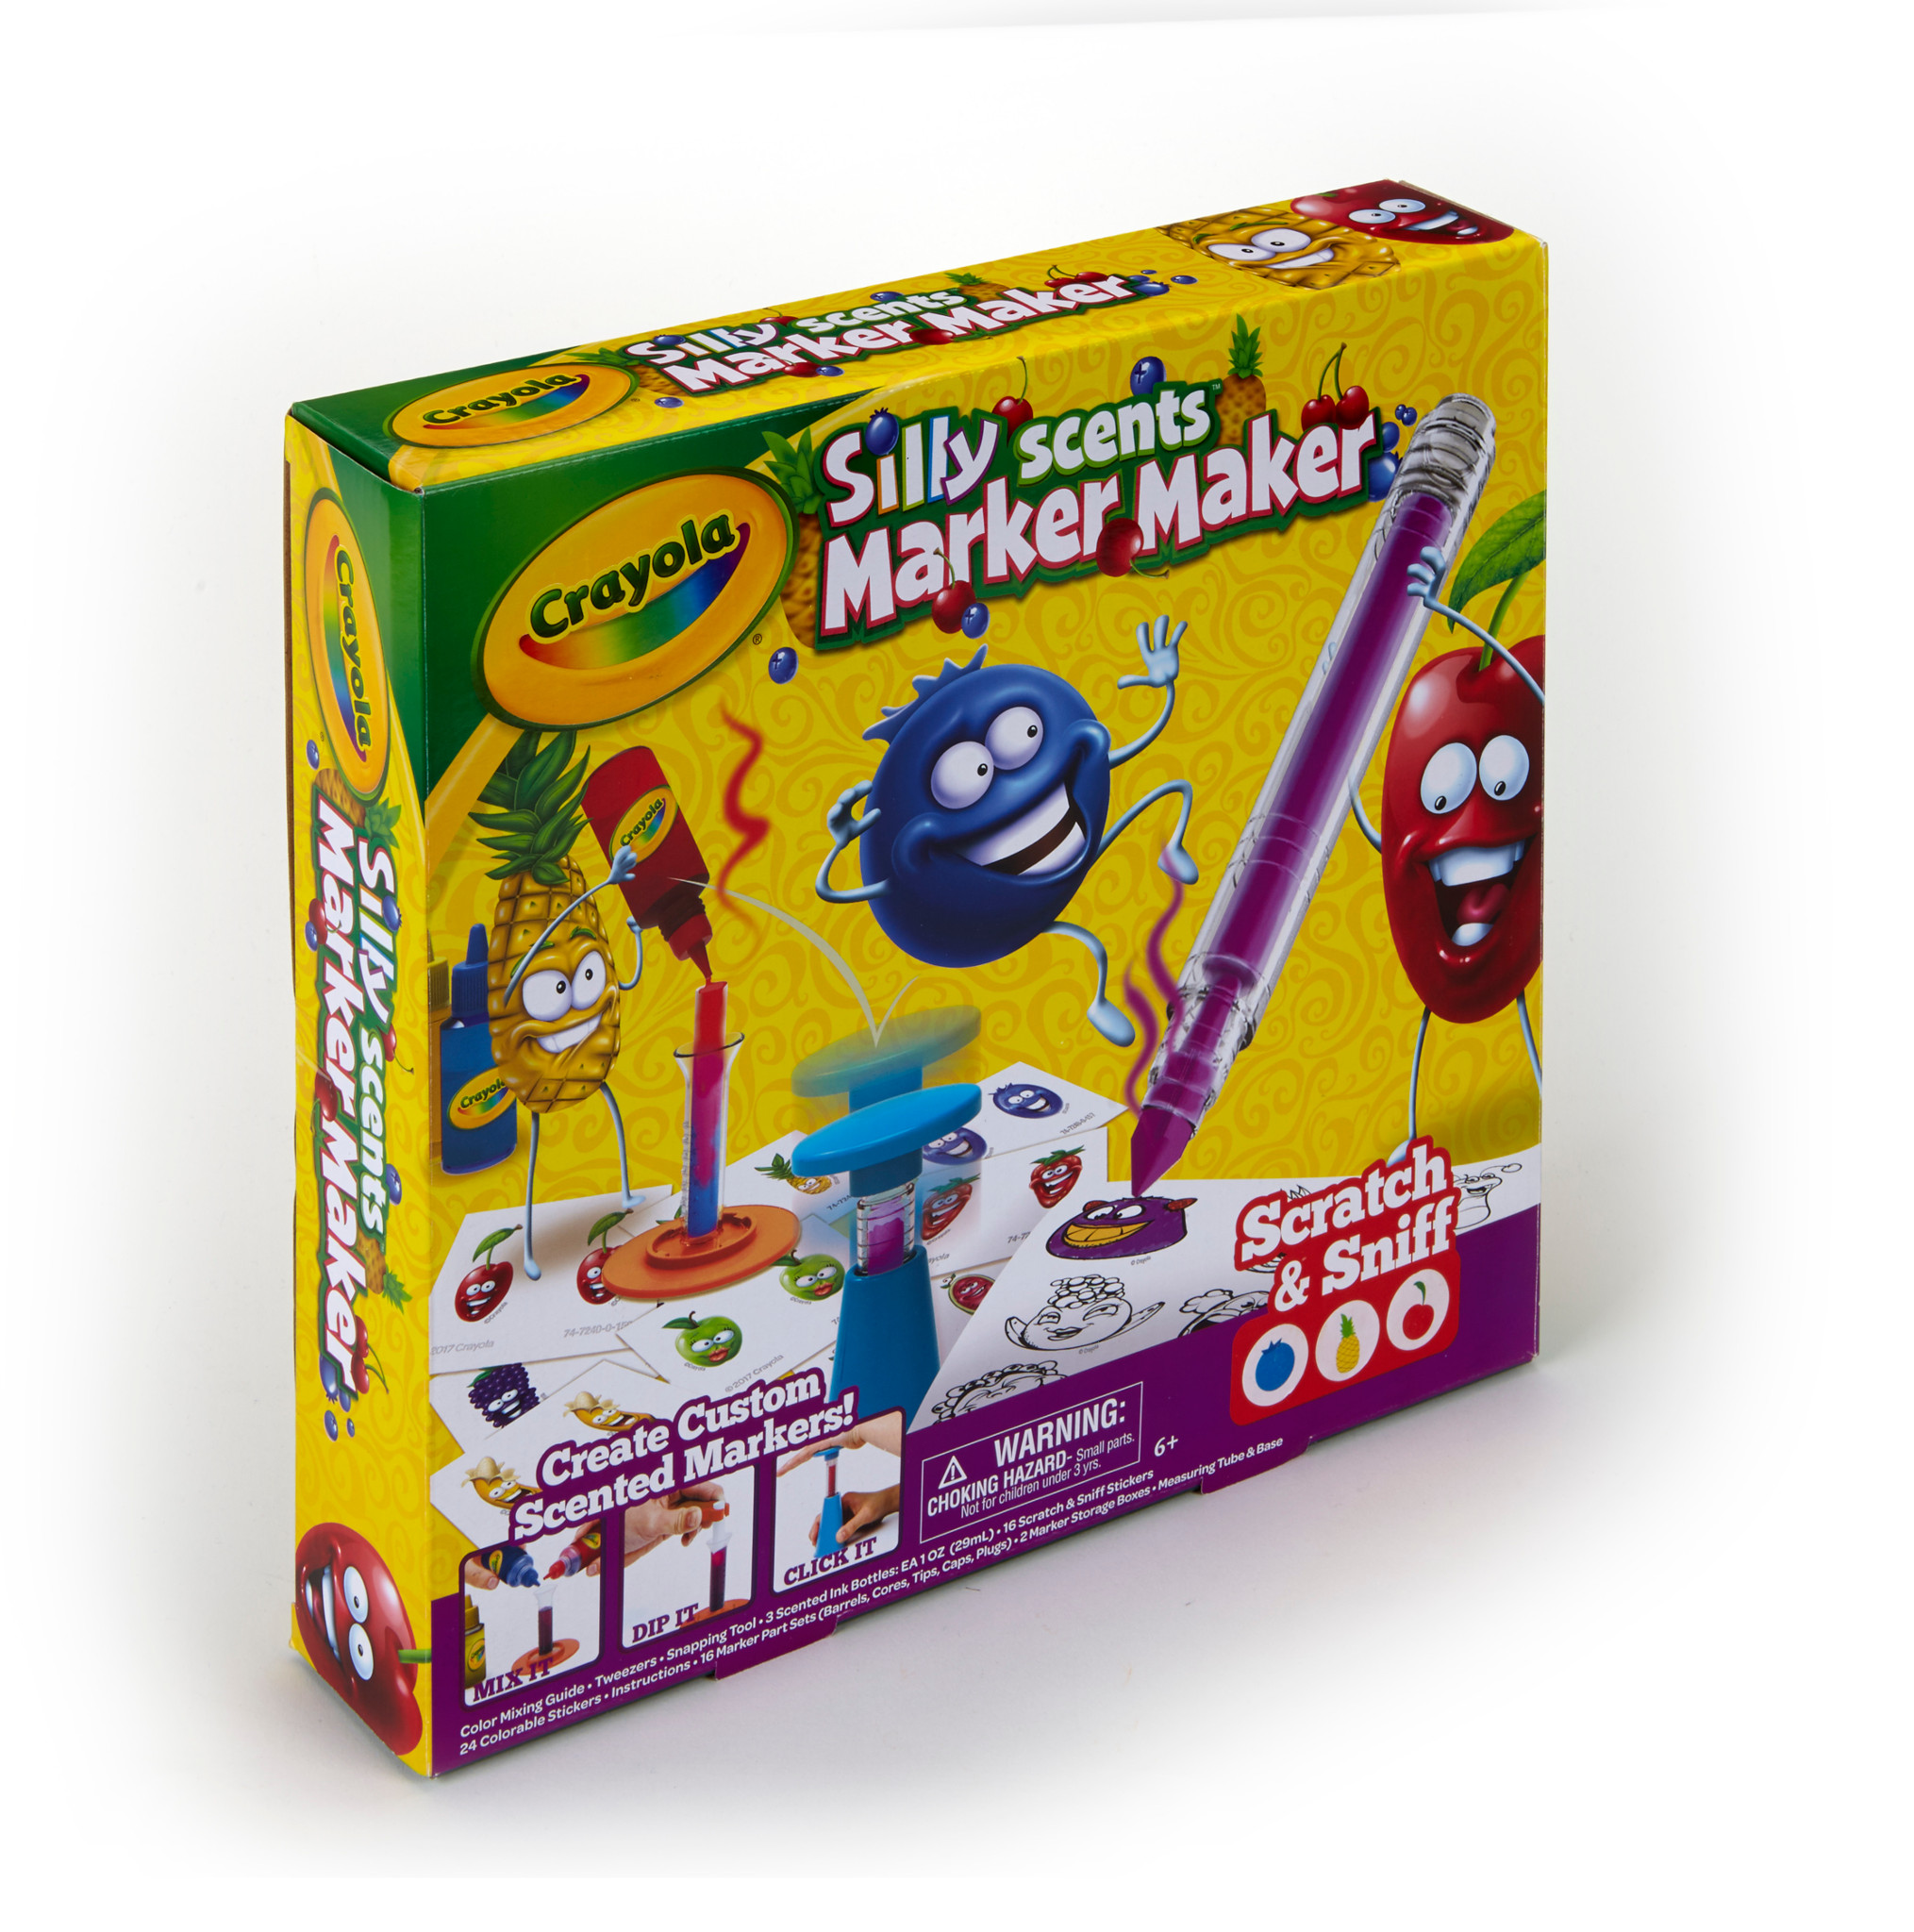 Crayola Silly Scents Marker Maker Kit - image 3 of 11